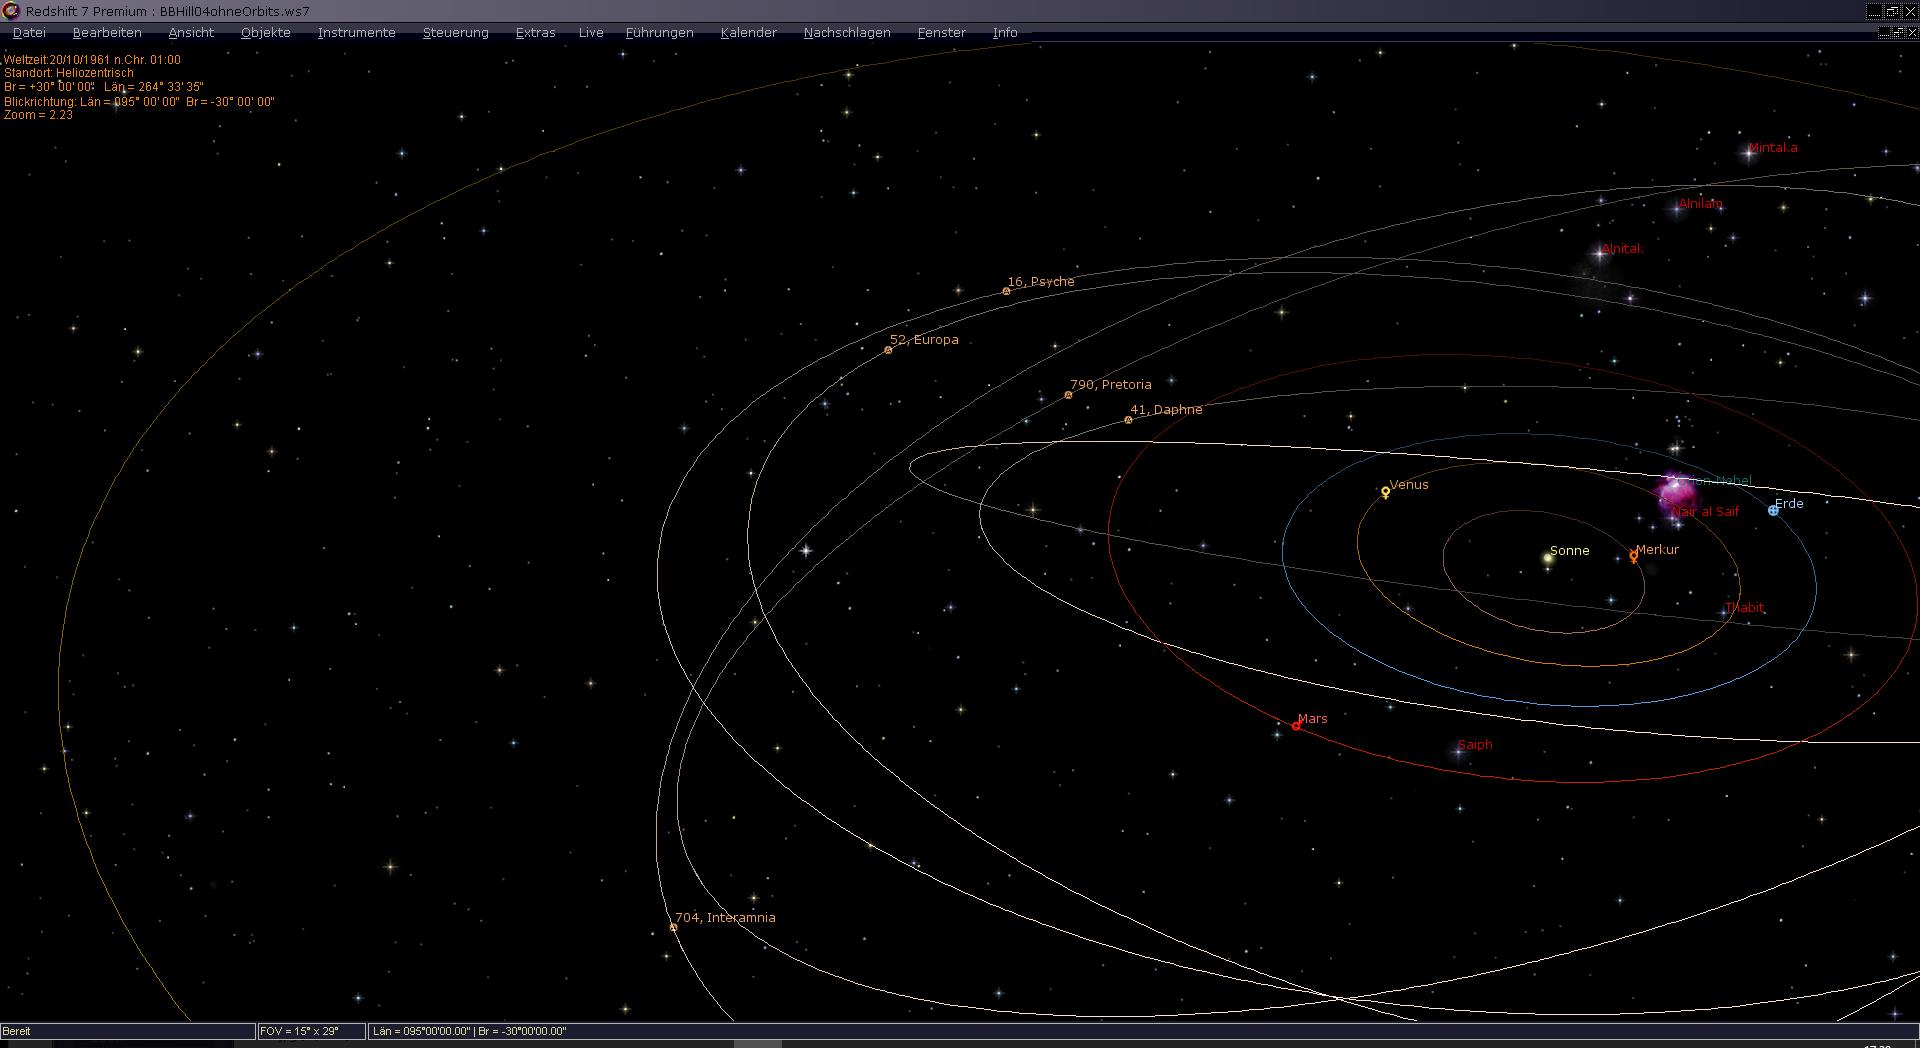 The central part of our Solar System with planetary and asteroid orbits